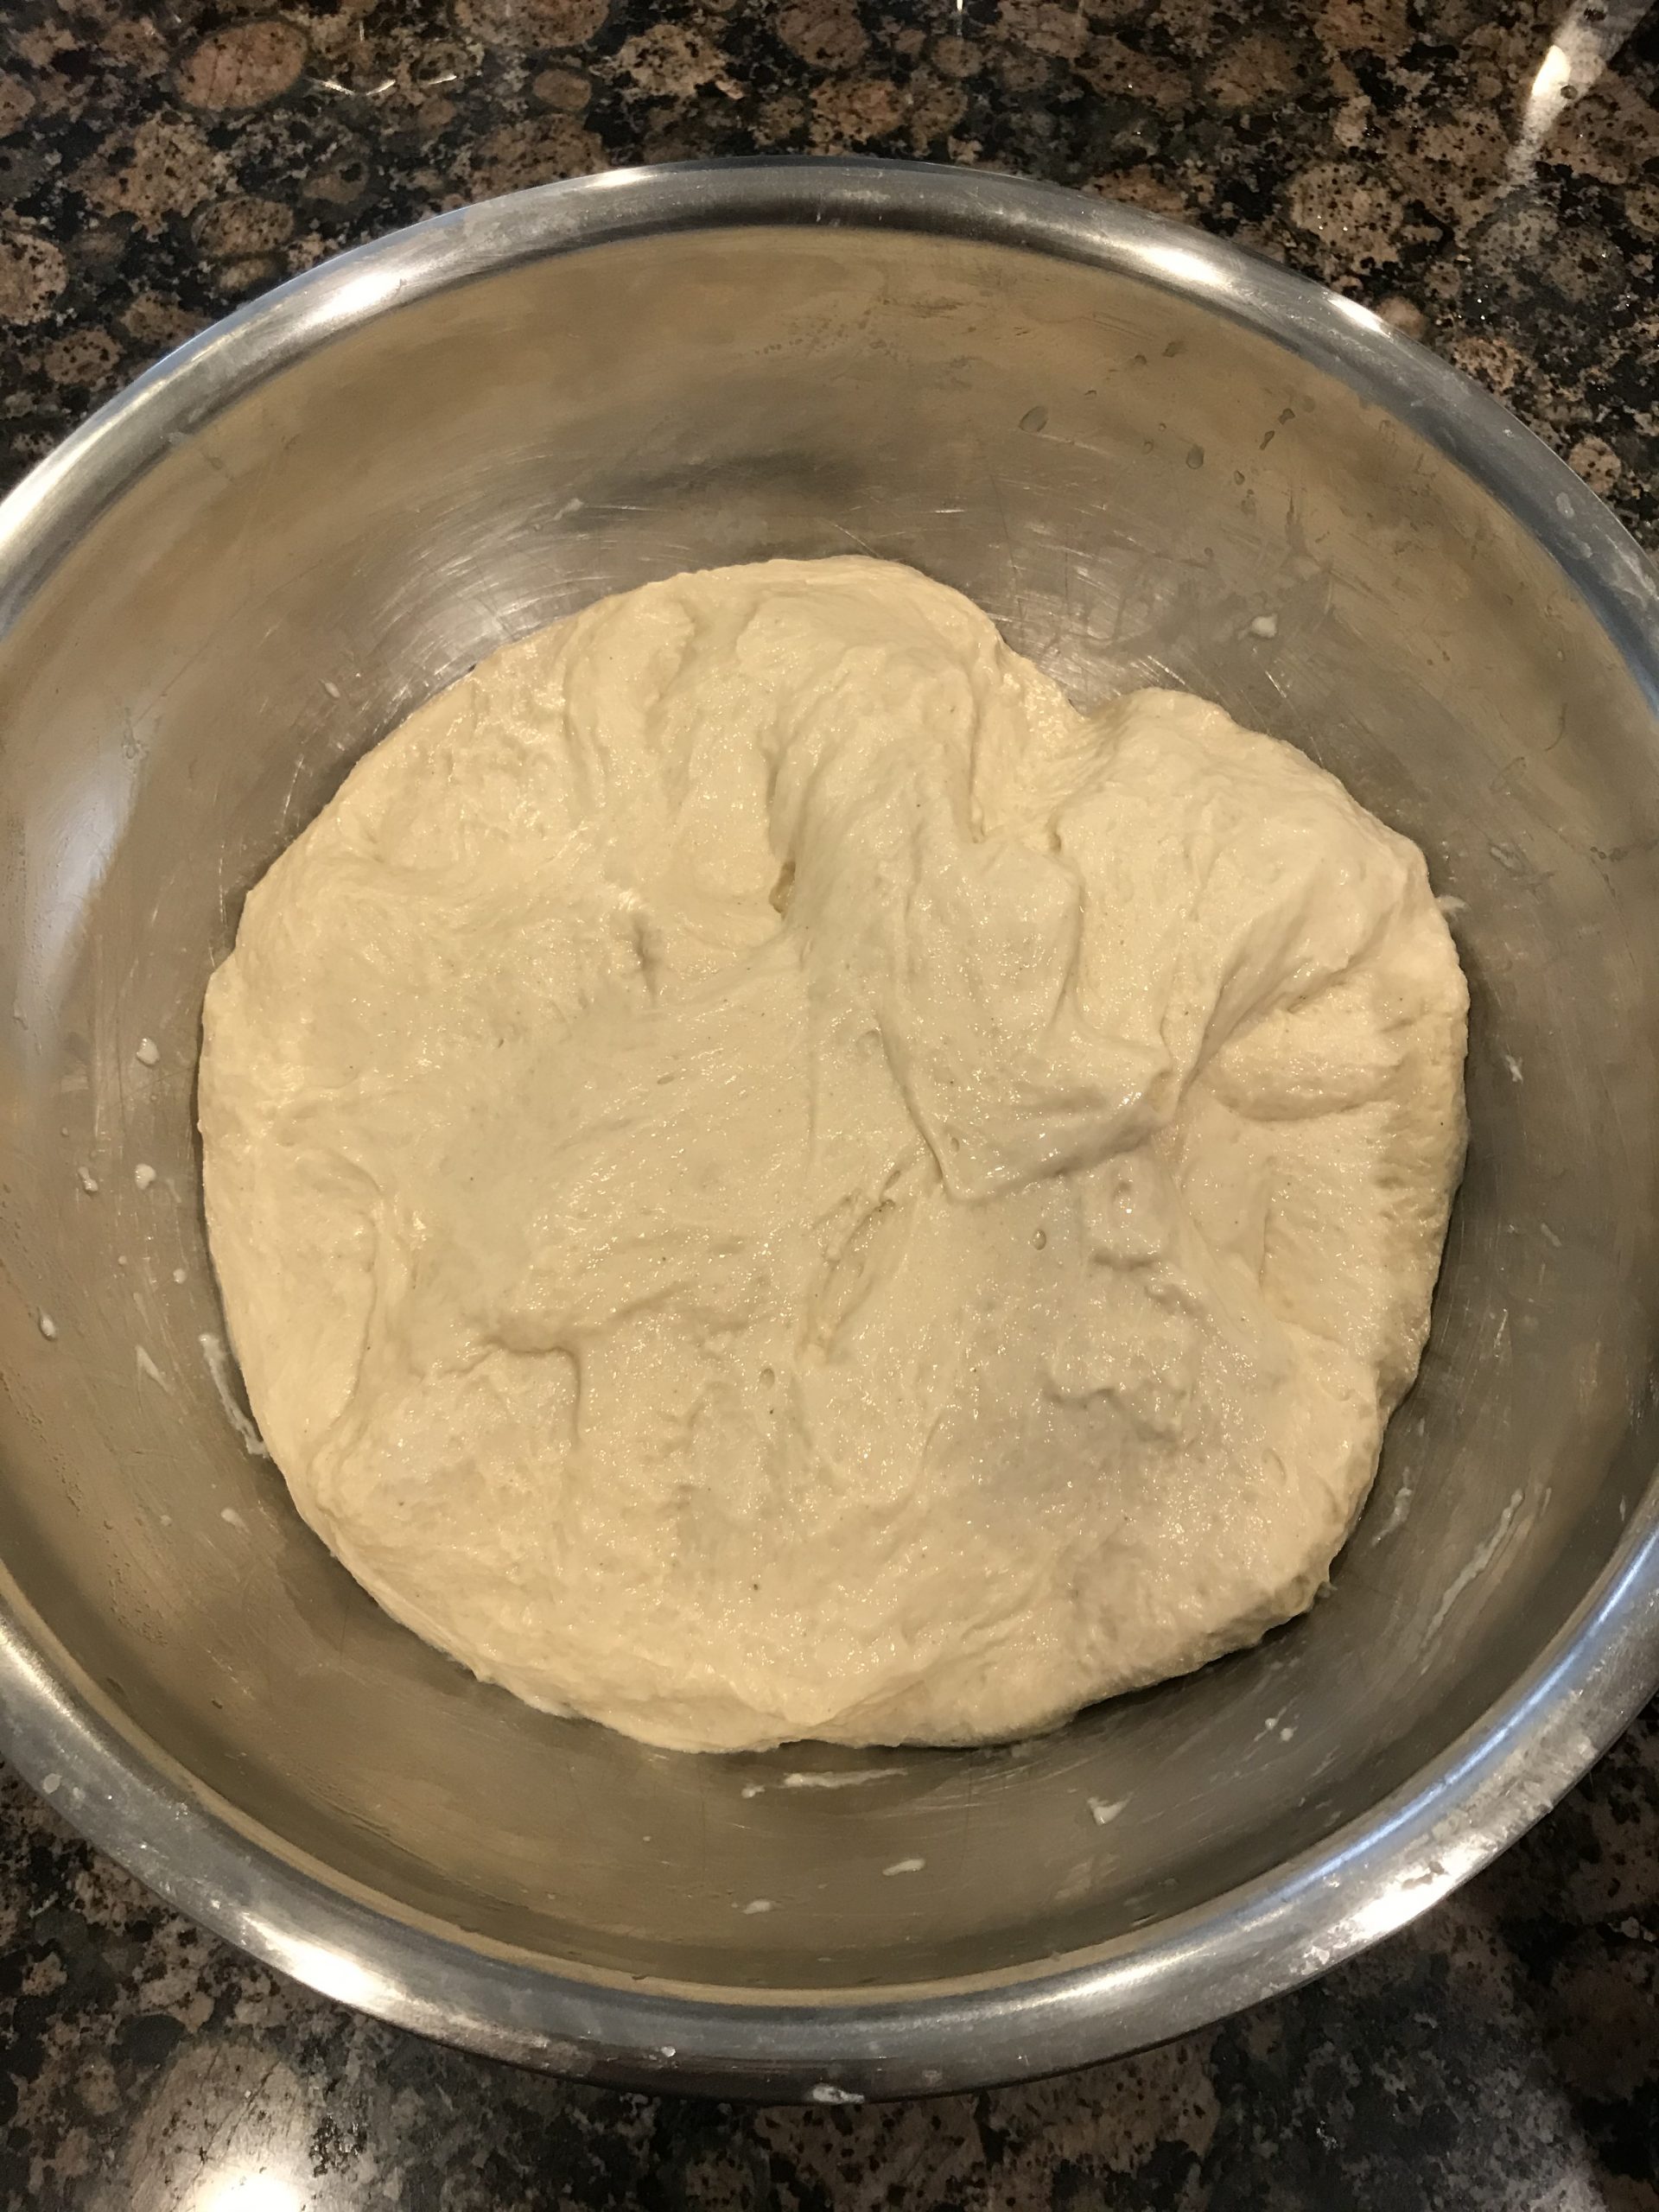 Initially, the dough is very sticky and wet